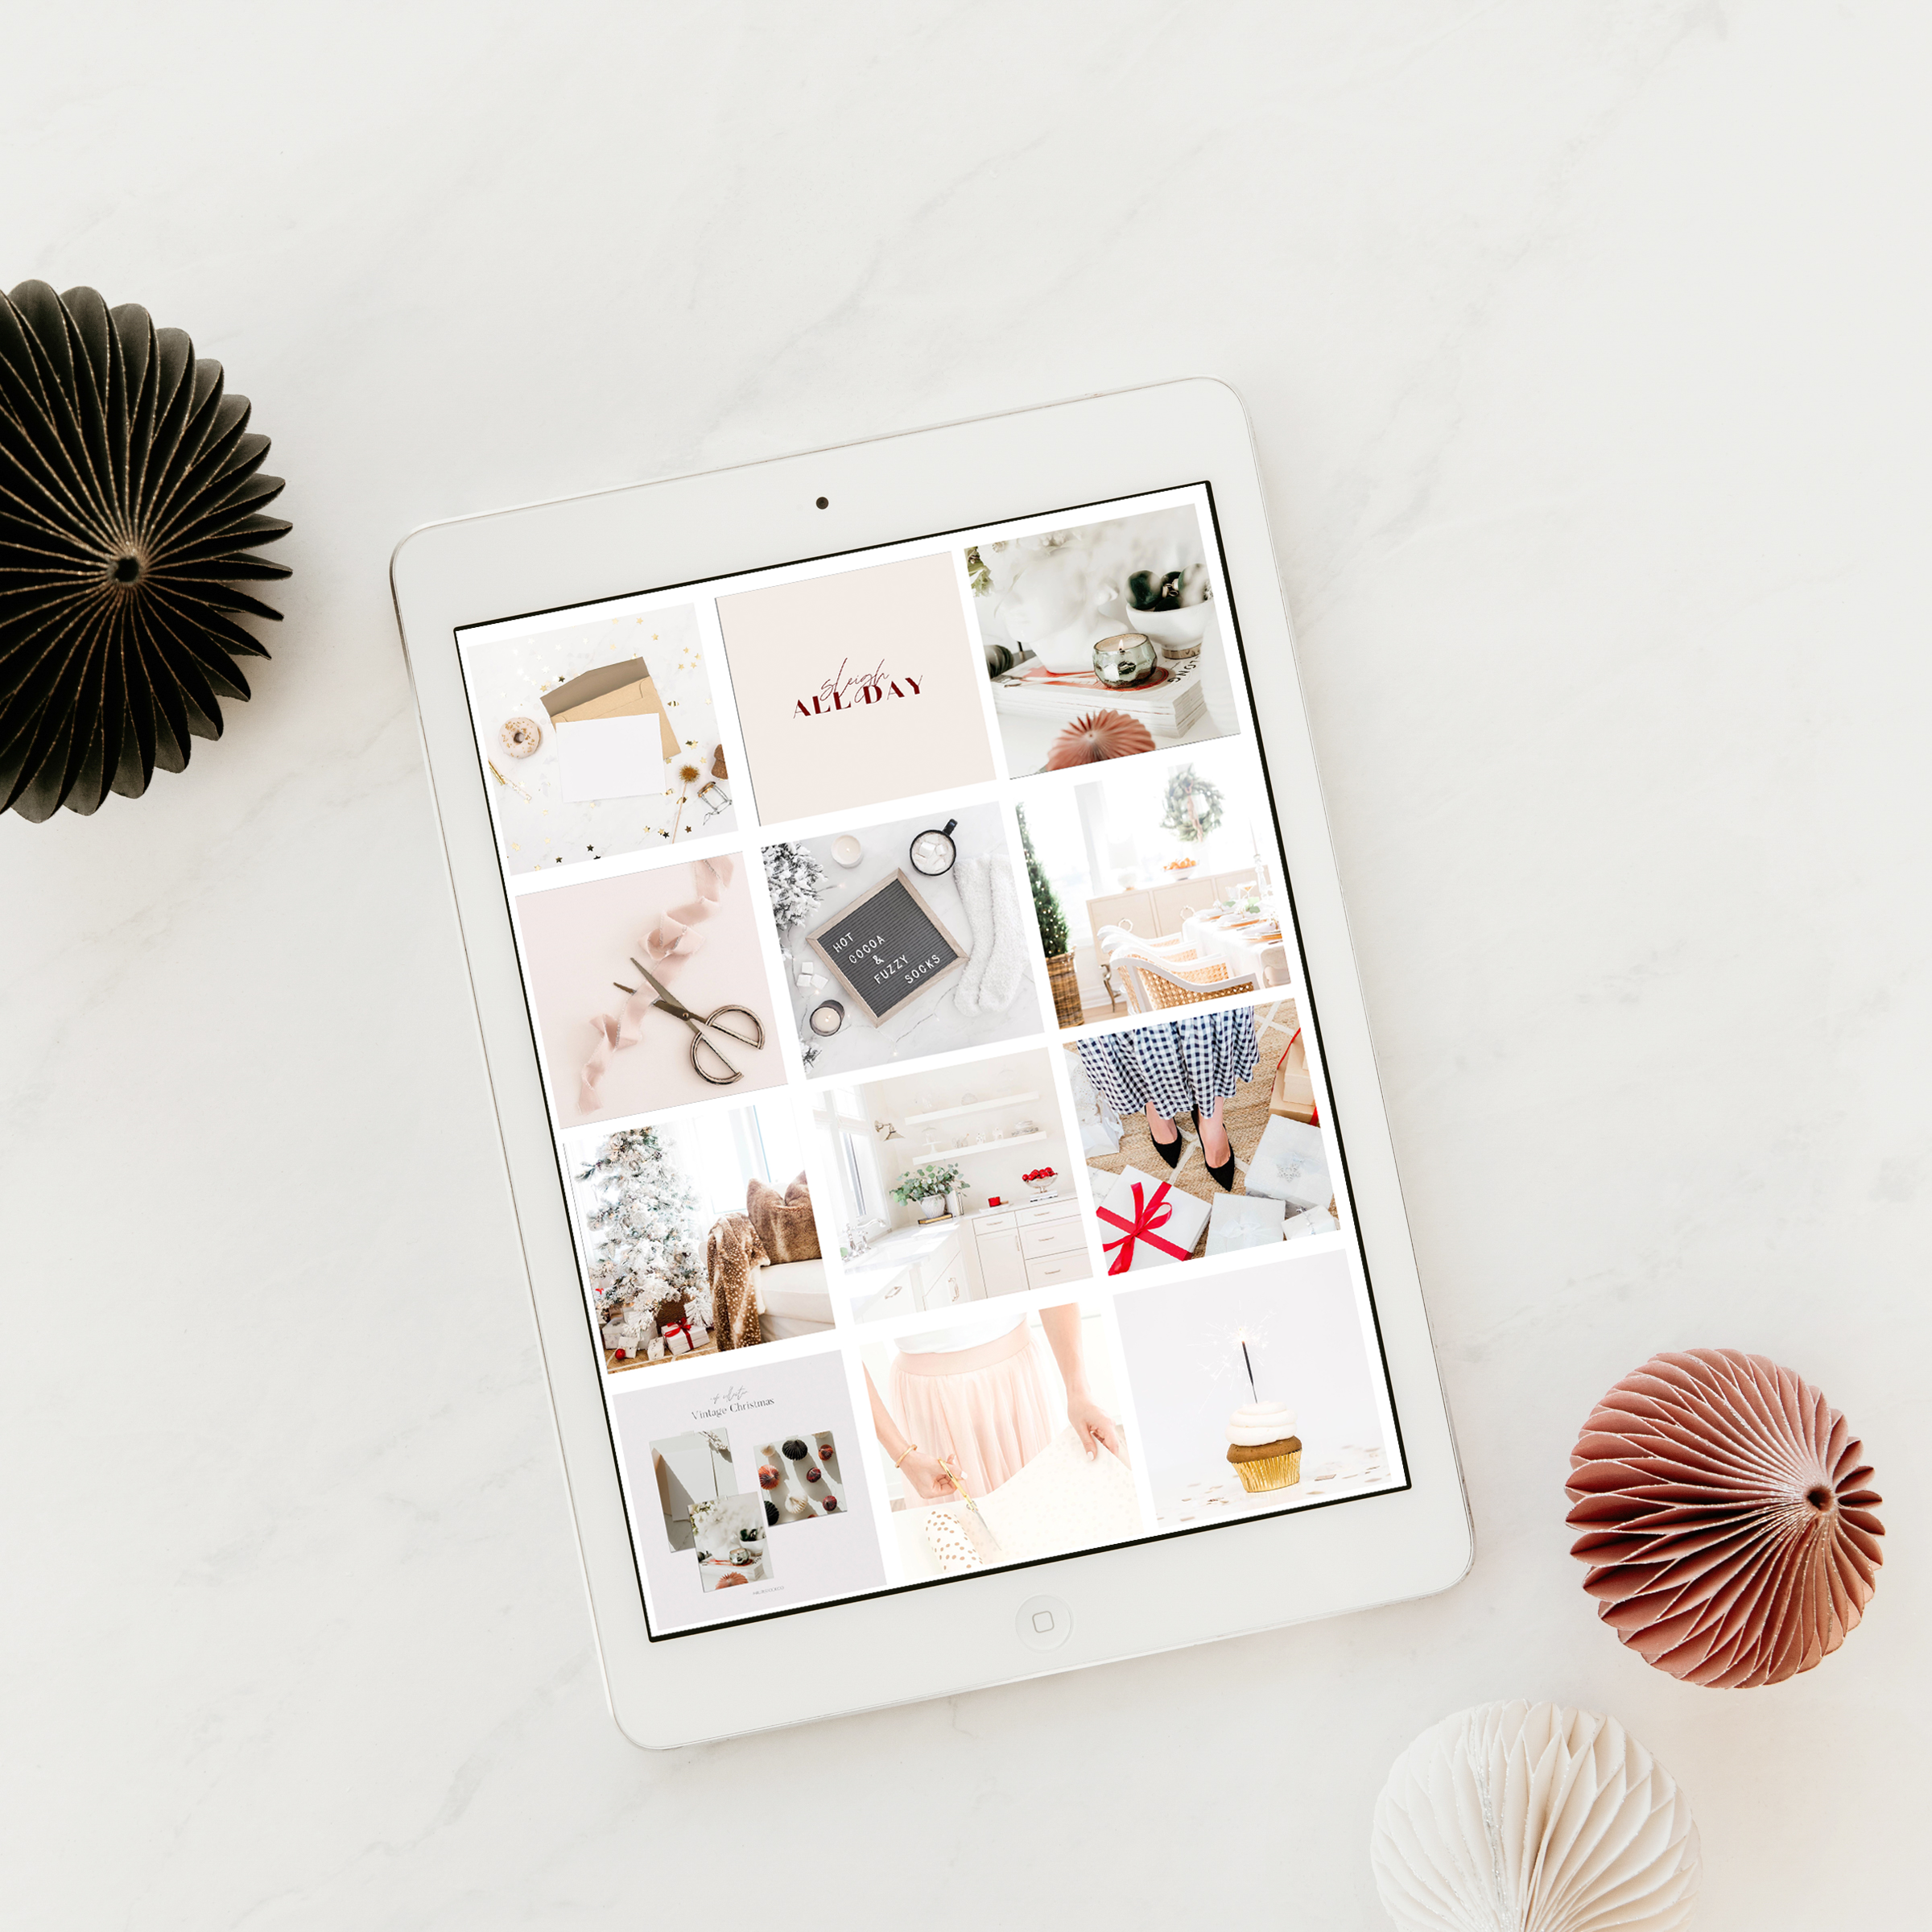 Use Haute Stock images to curate an instagram feed that exudes holiday vibes.